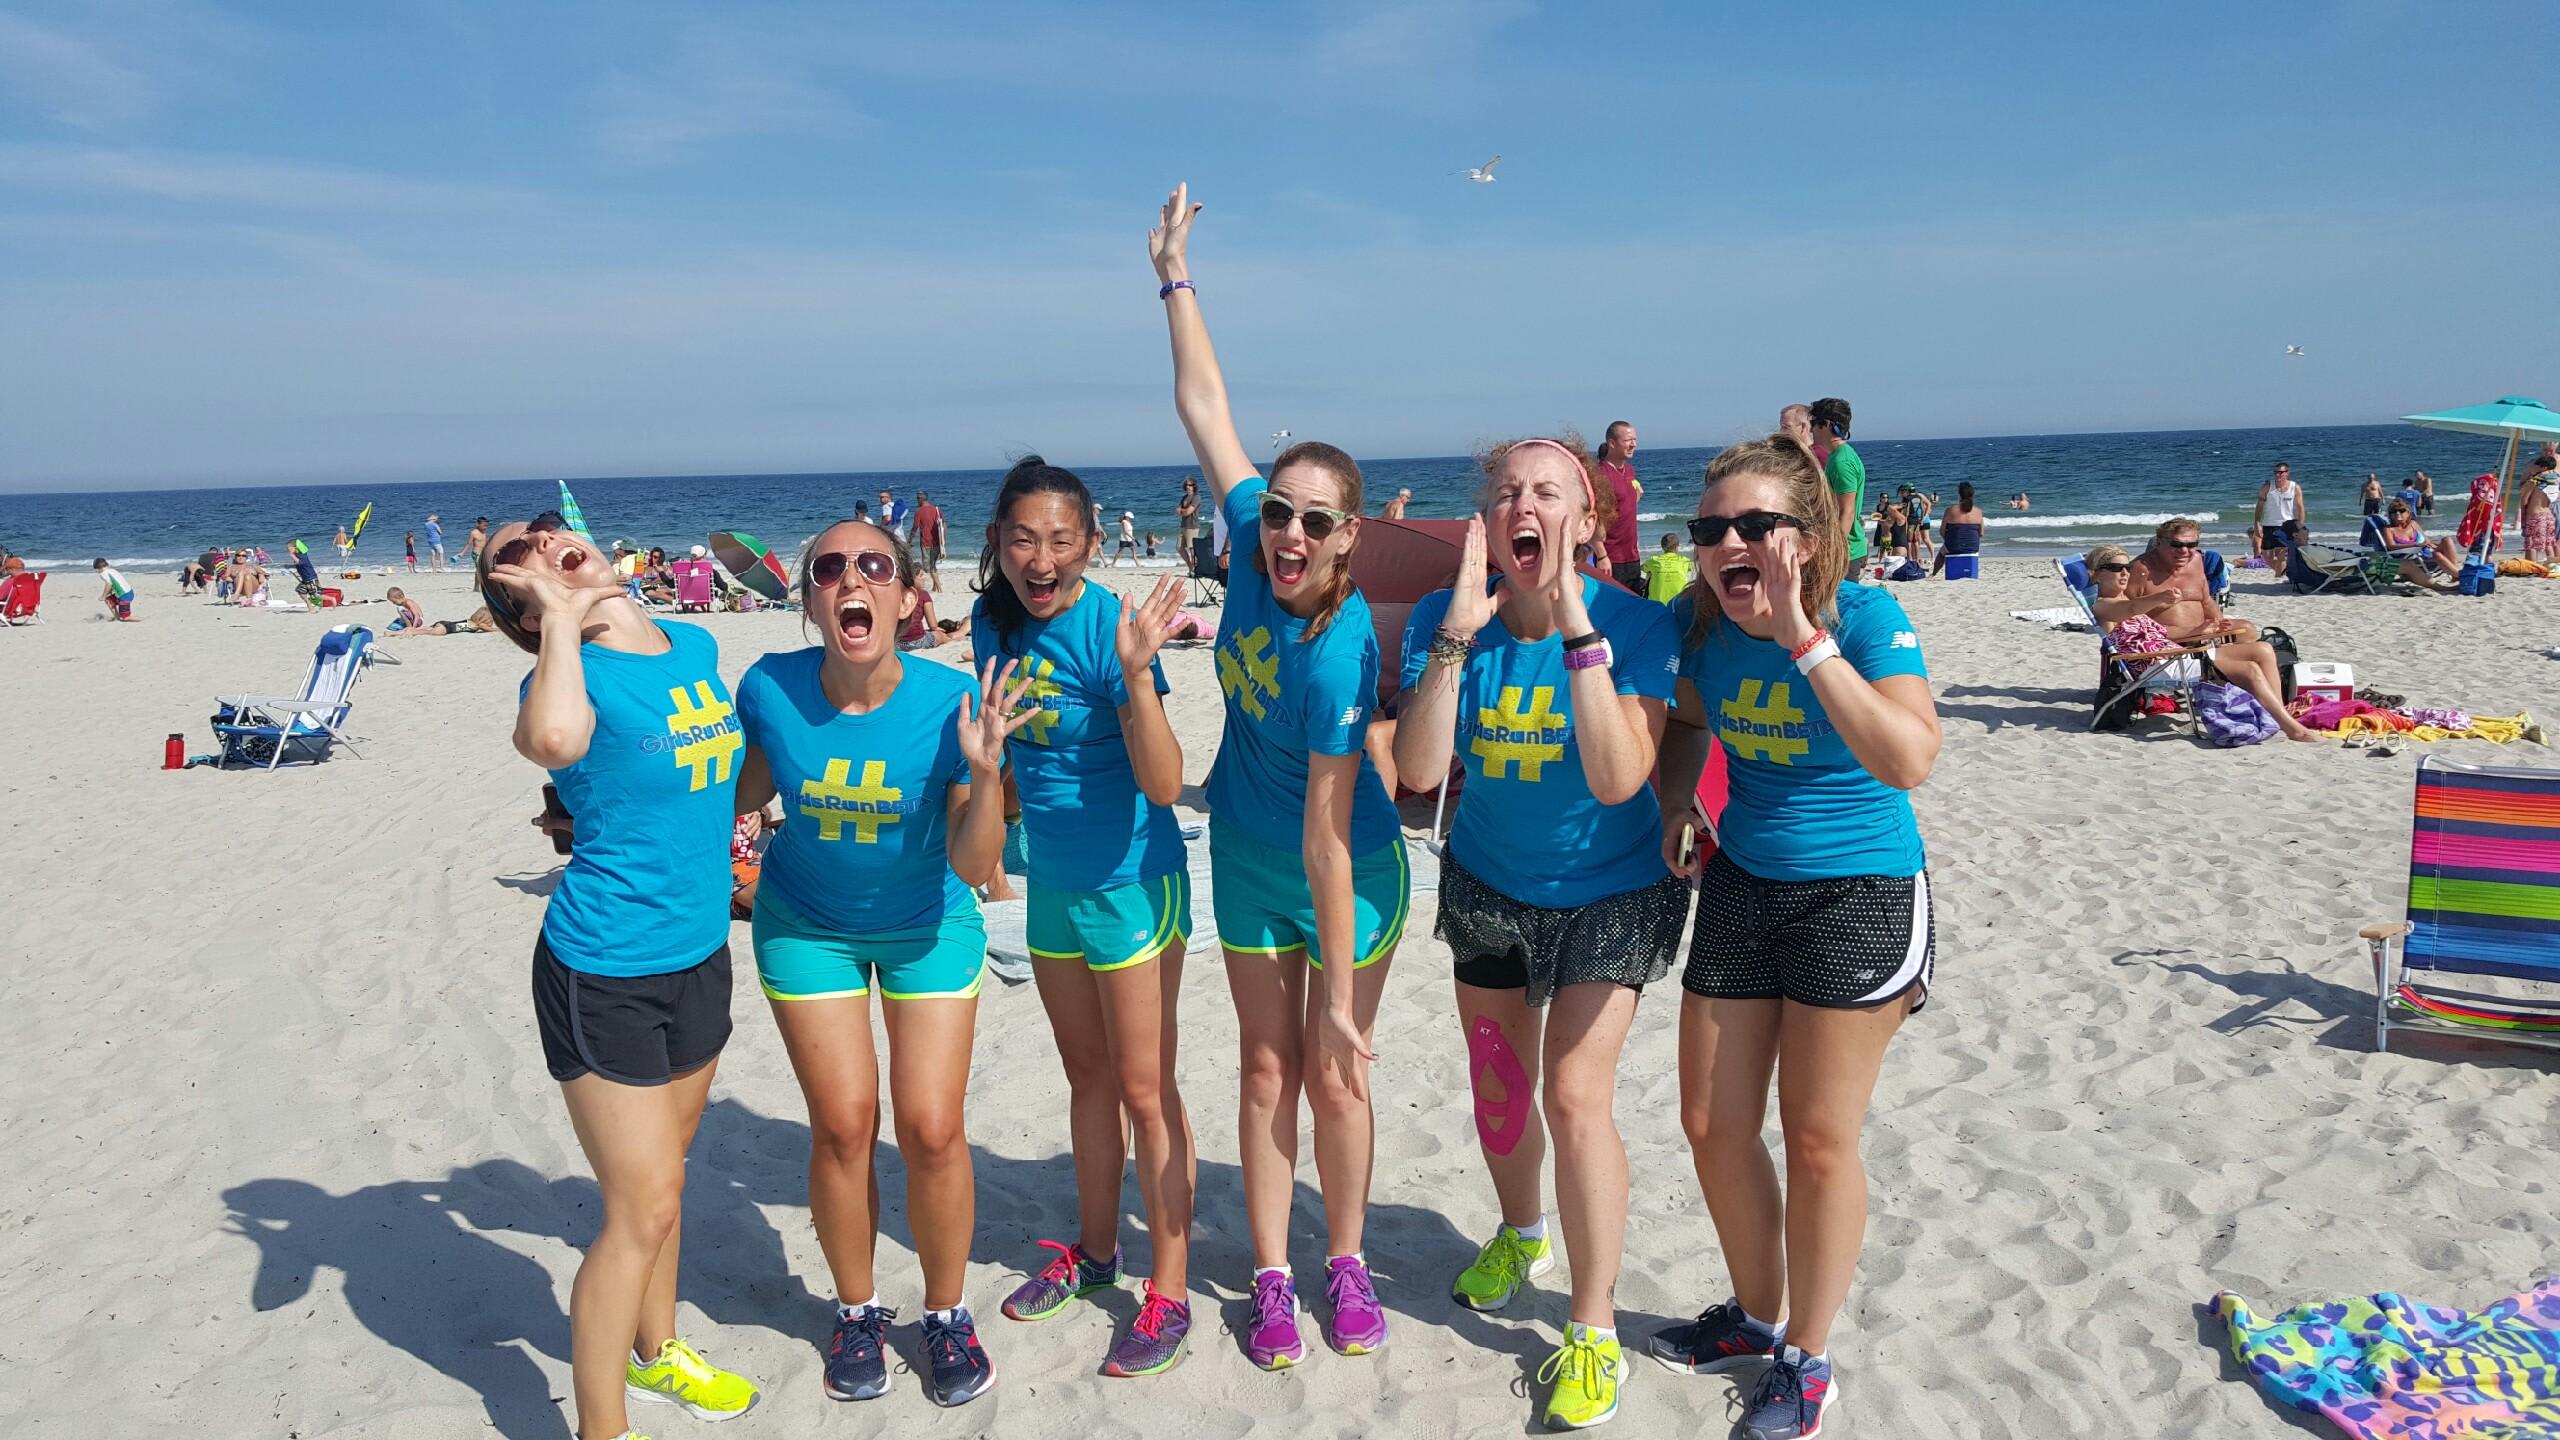 Ragnar Relay Reach The Beach Running in Jefferson — Let’s Do This